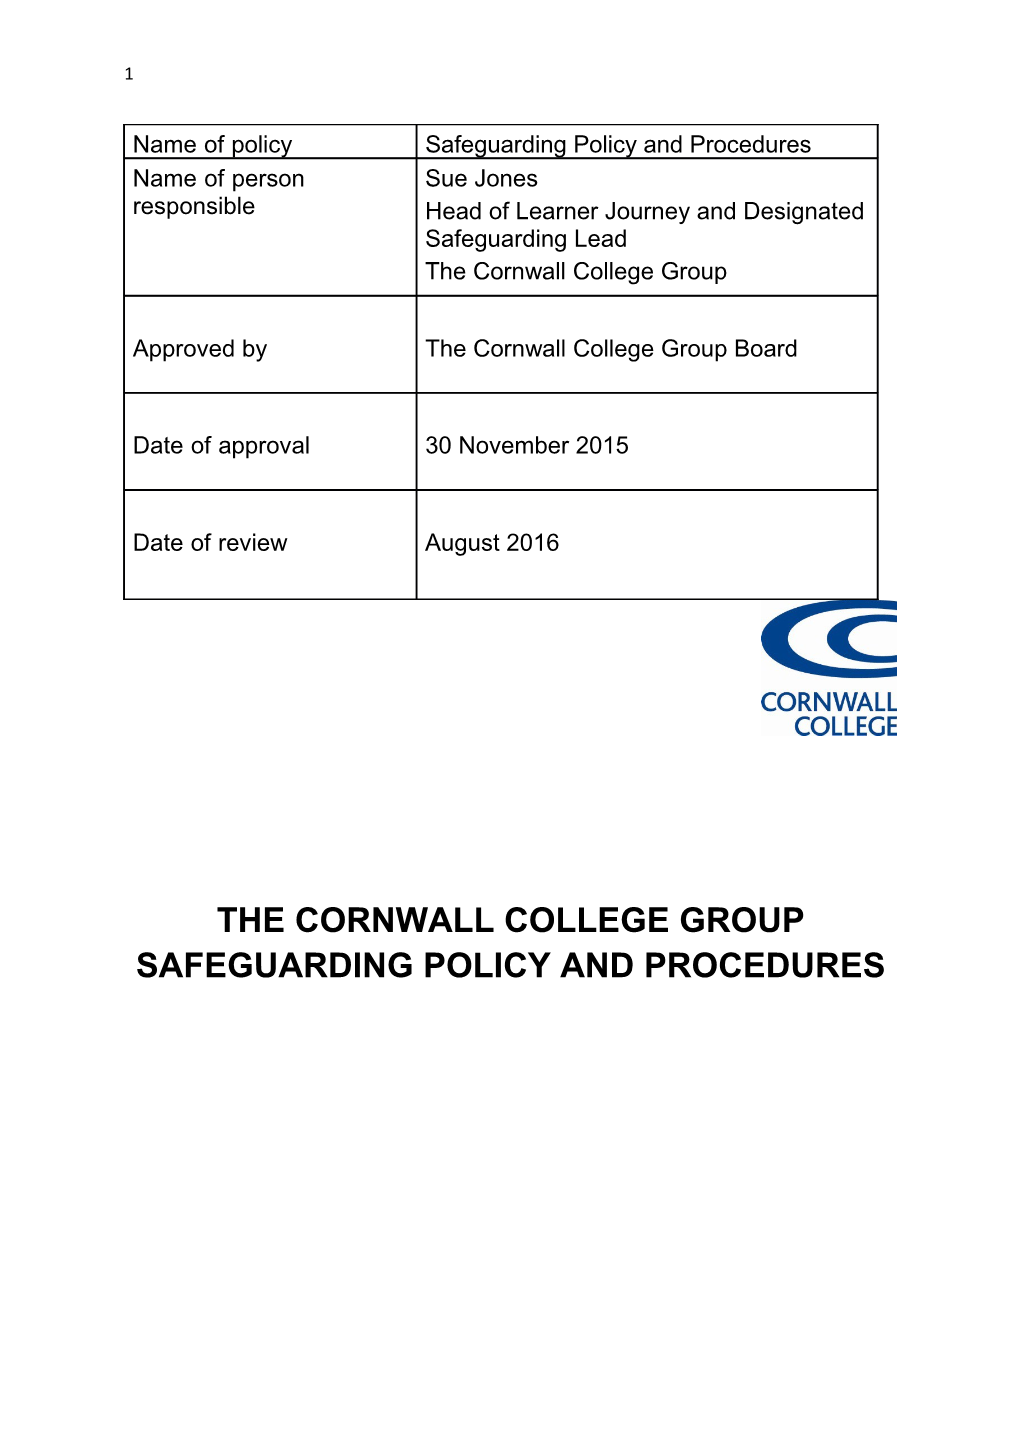 The Cornwall College Group Safeguarding Policy and Procedures